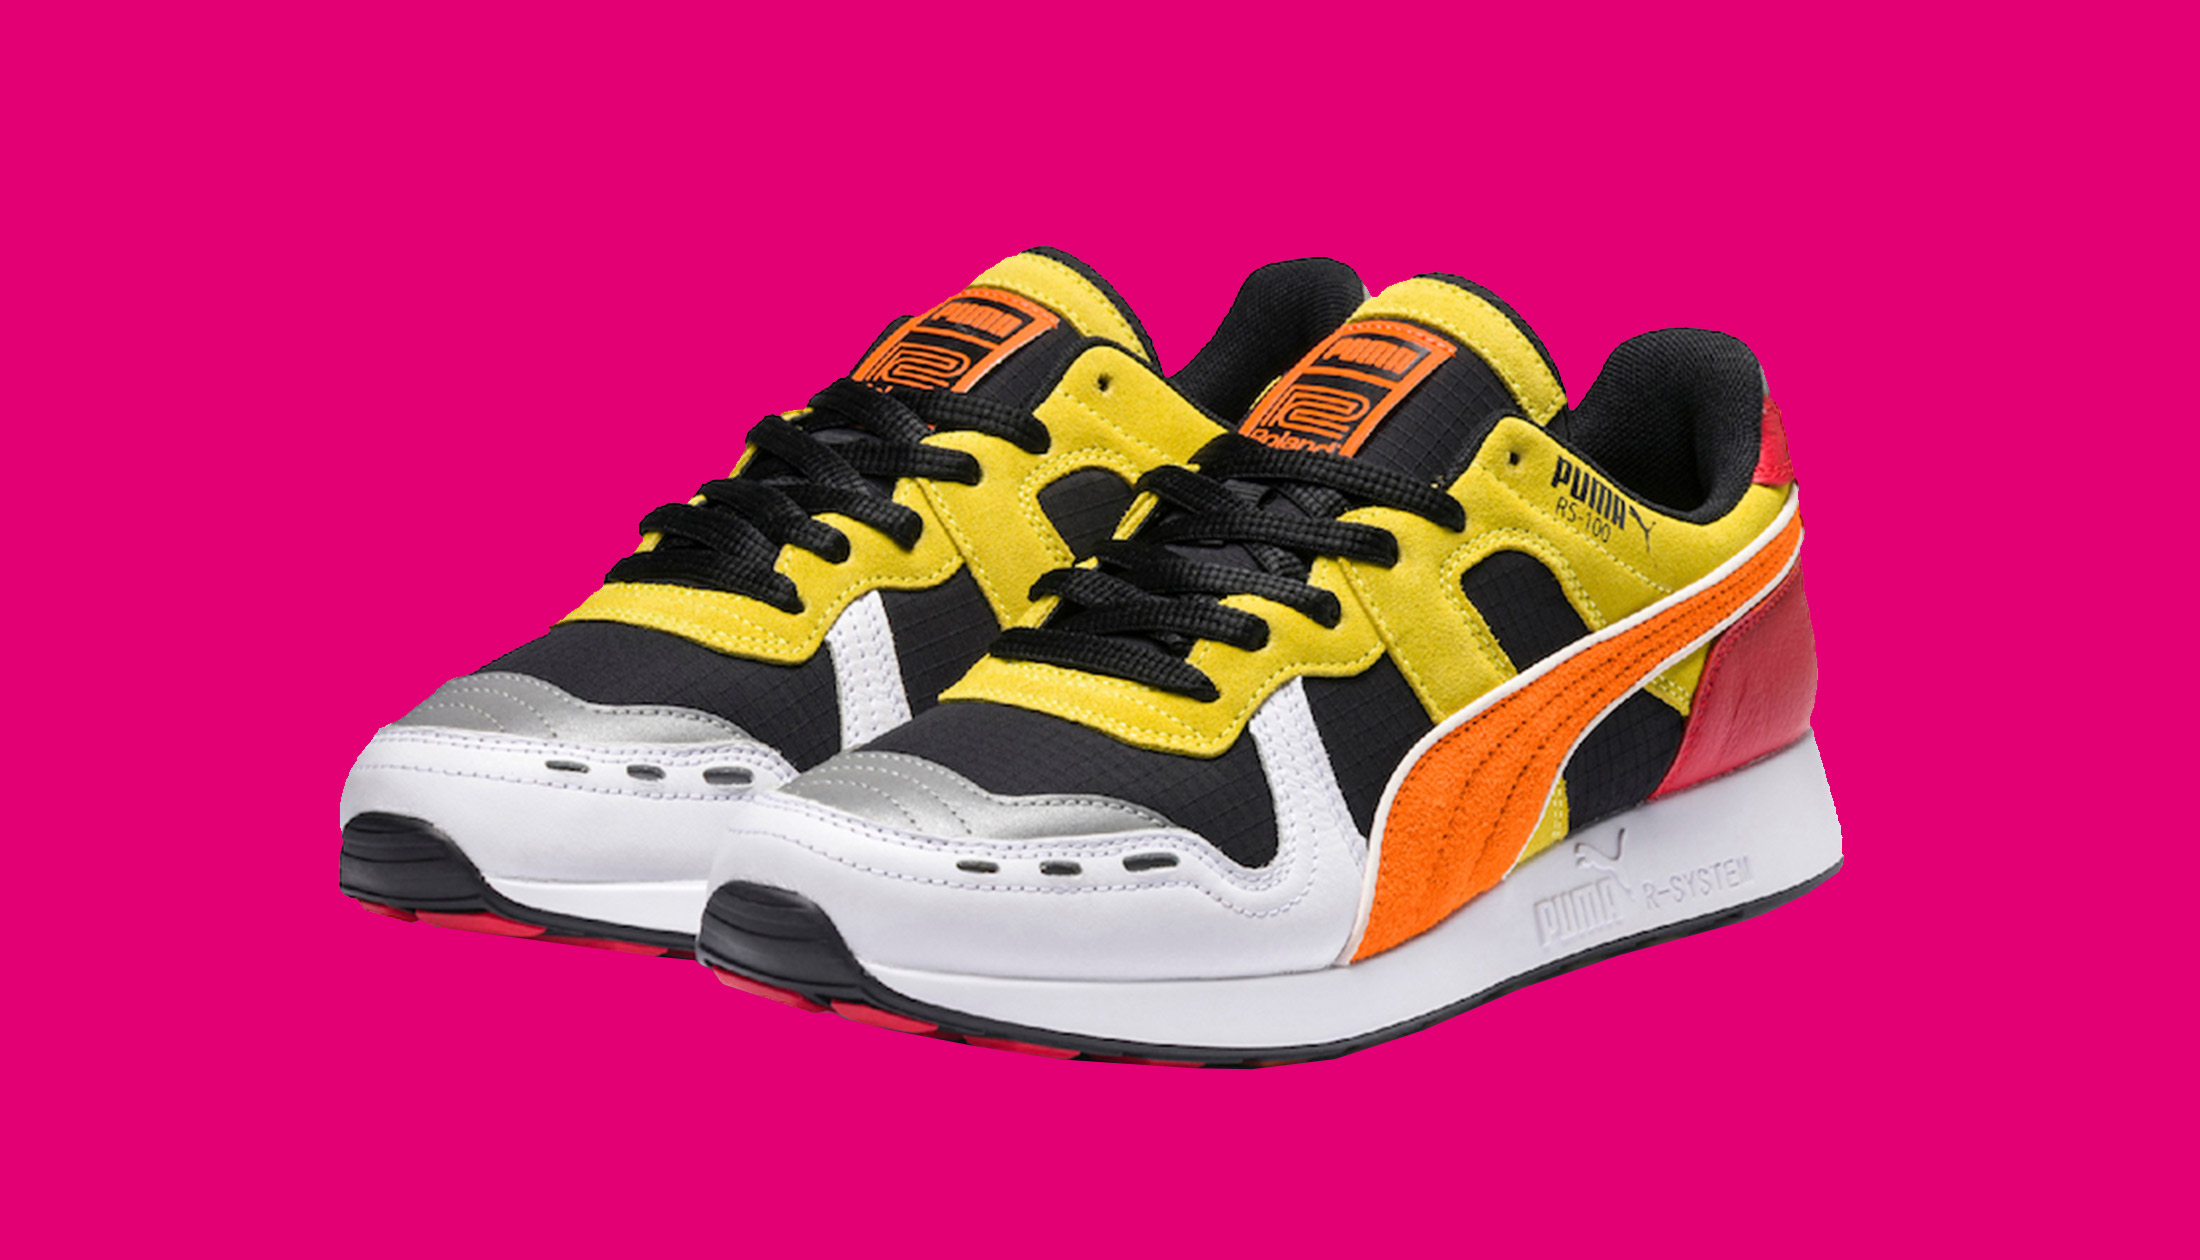 recibo Brote Rango Roland And Puma Have Teamed Up To Create A New Sneaker Inspired By The TR- 808 | Telekom Electronic Beats